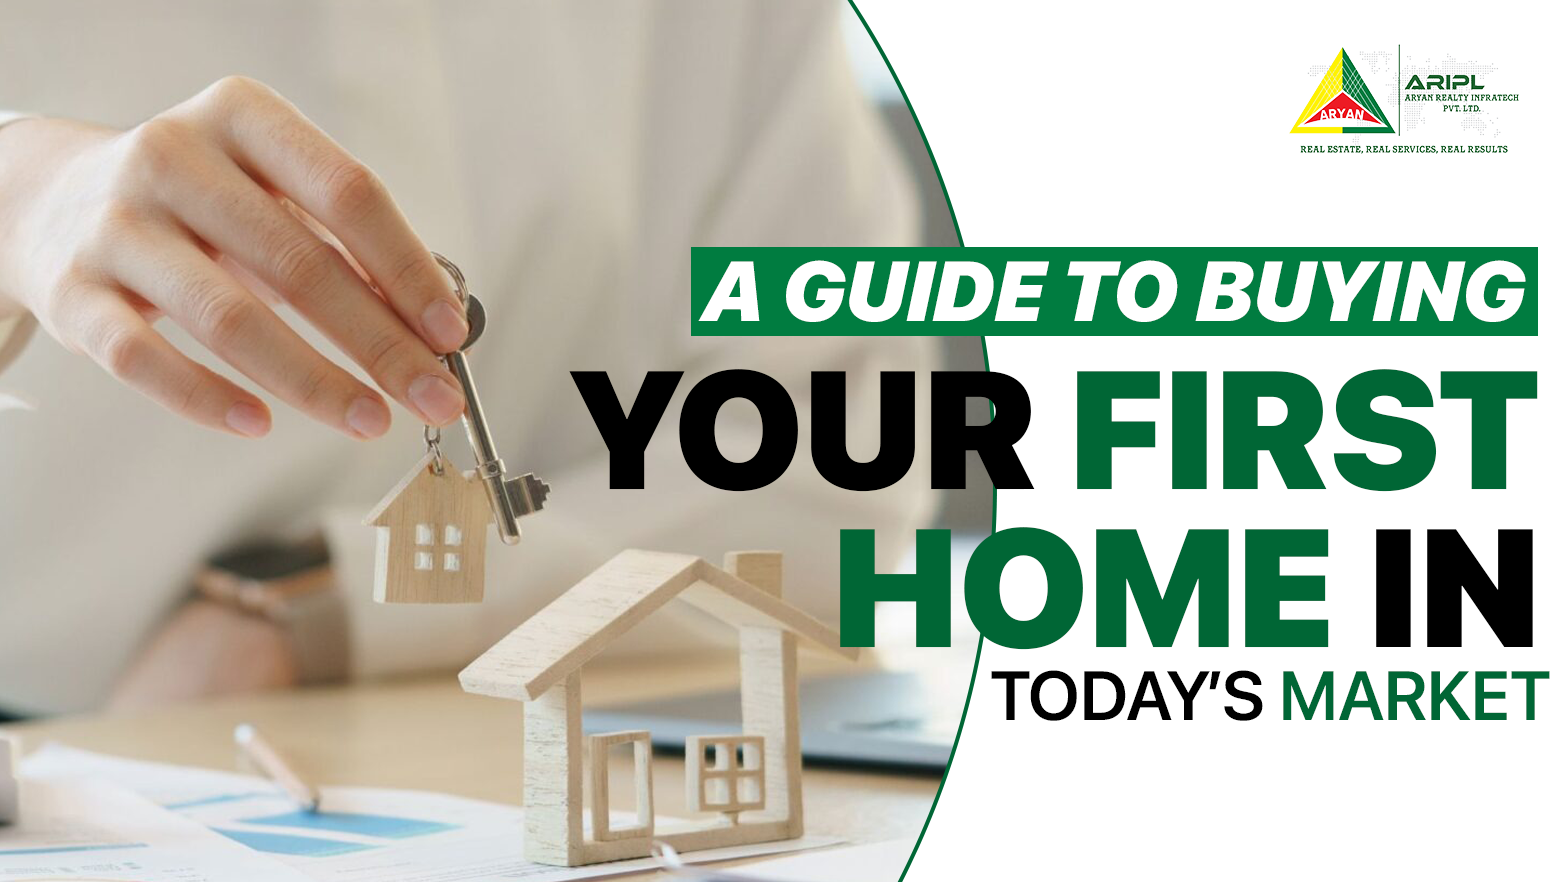 A guide to buying your first home in today’s market